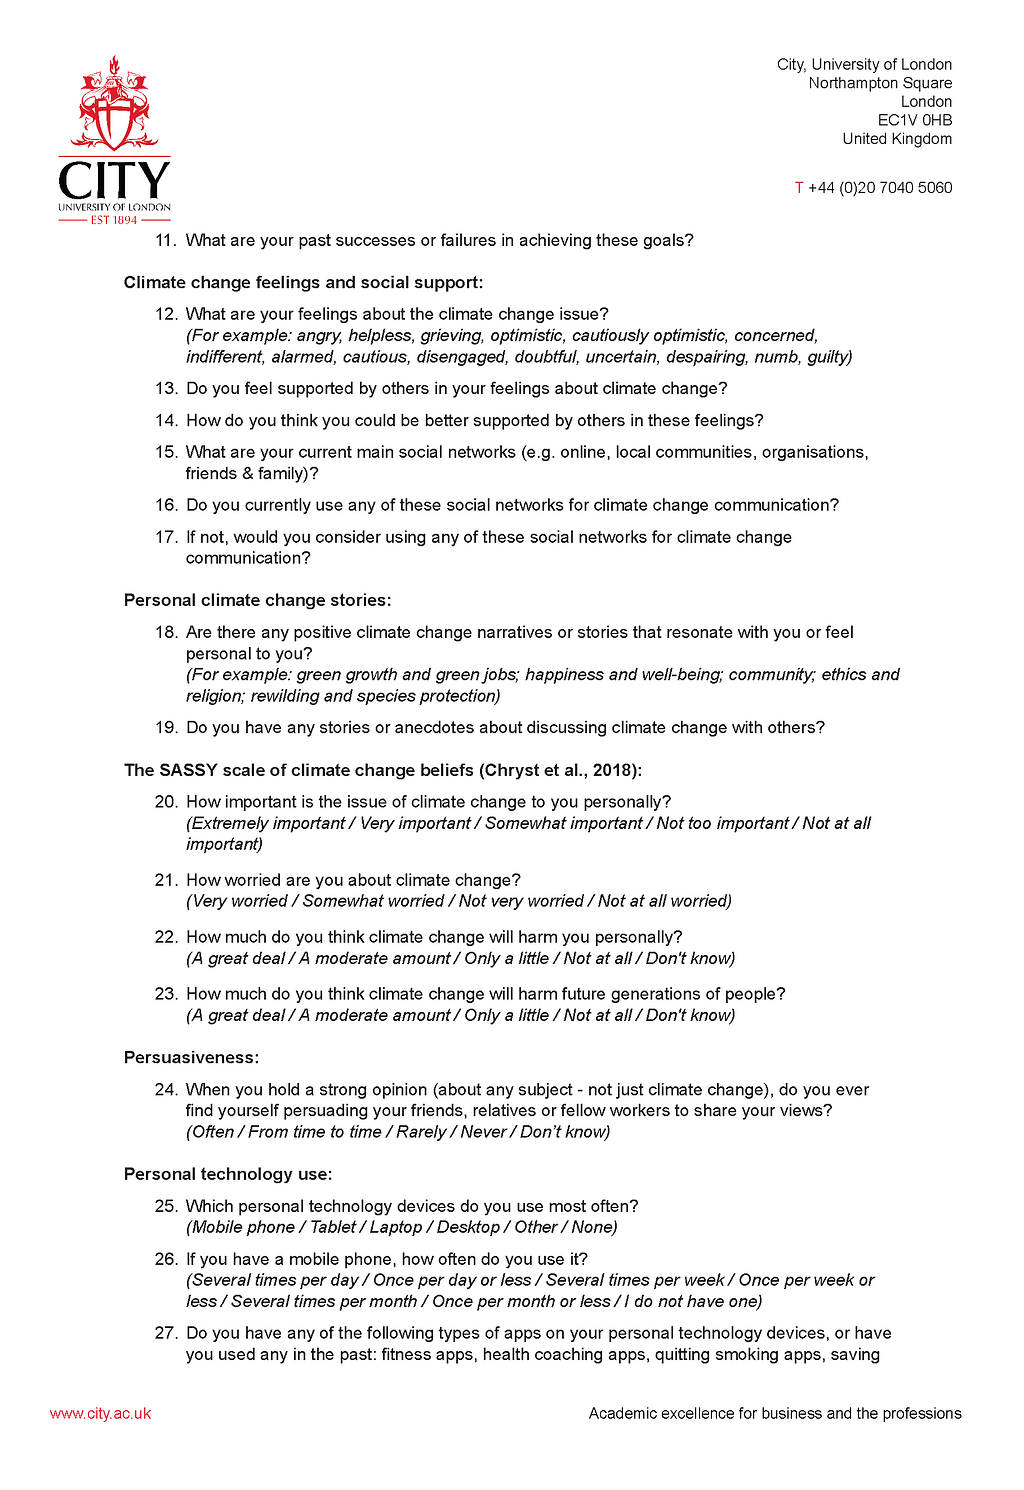 A page with a list of interview questions